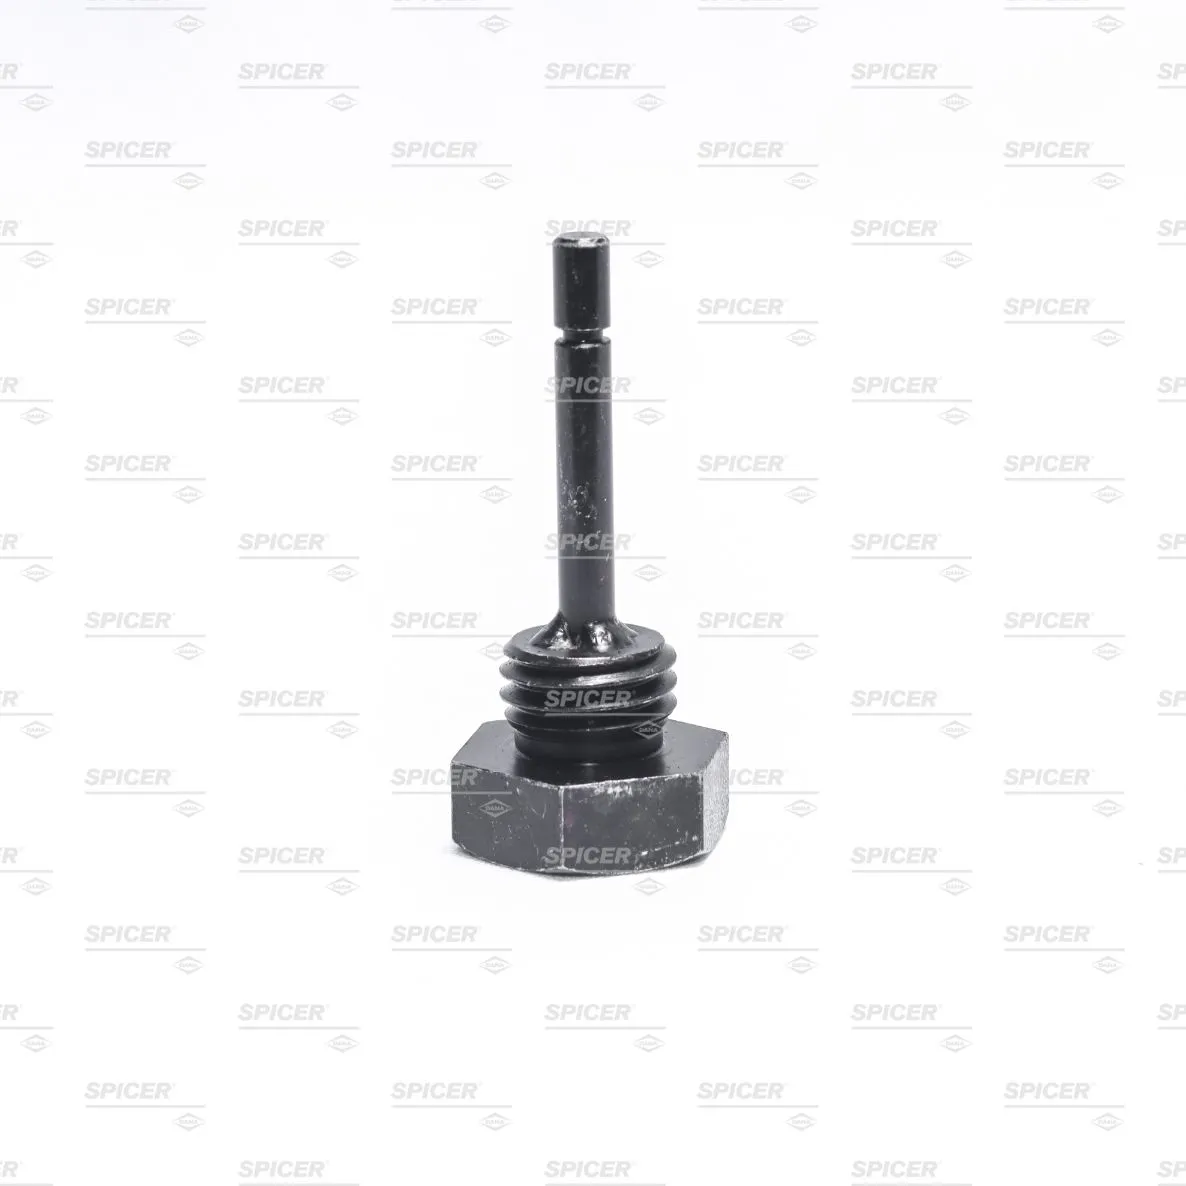 Spicer + Axle + Others + Assy - Dipstick + S20HM102-X_SP + buy